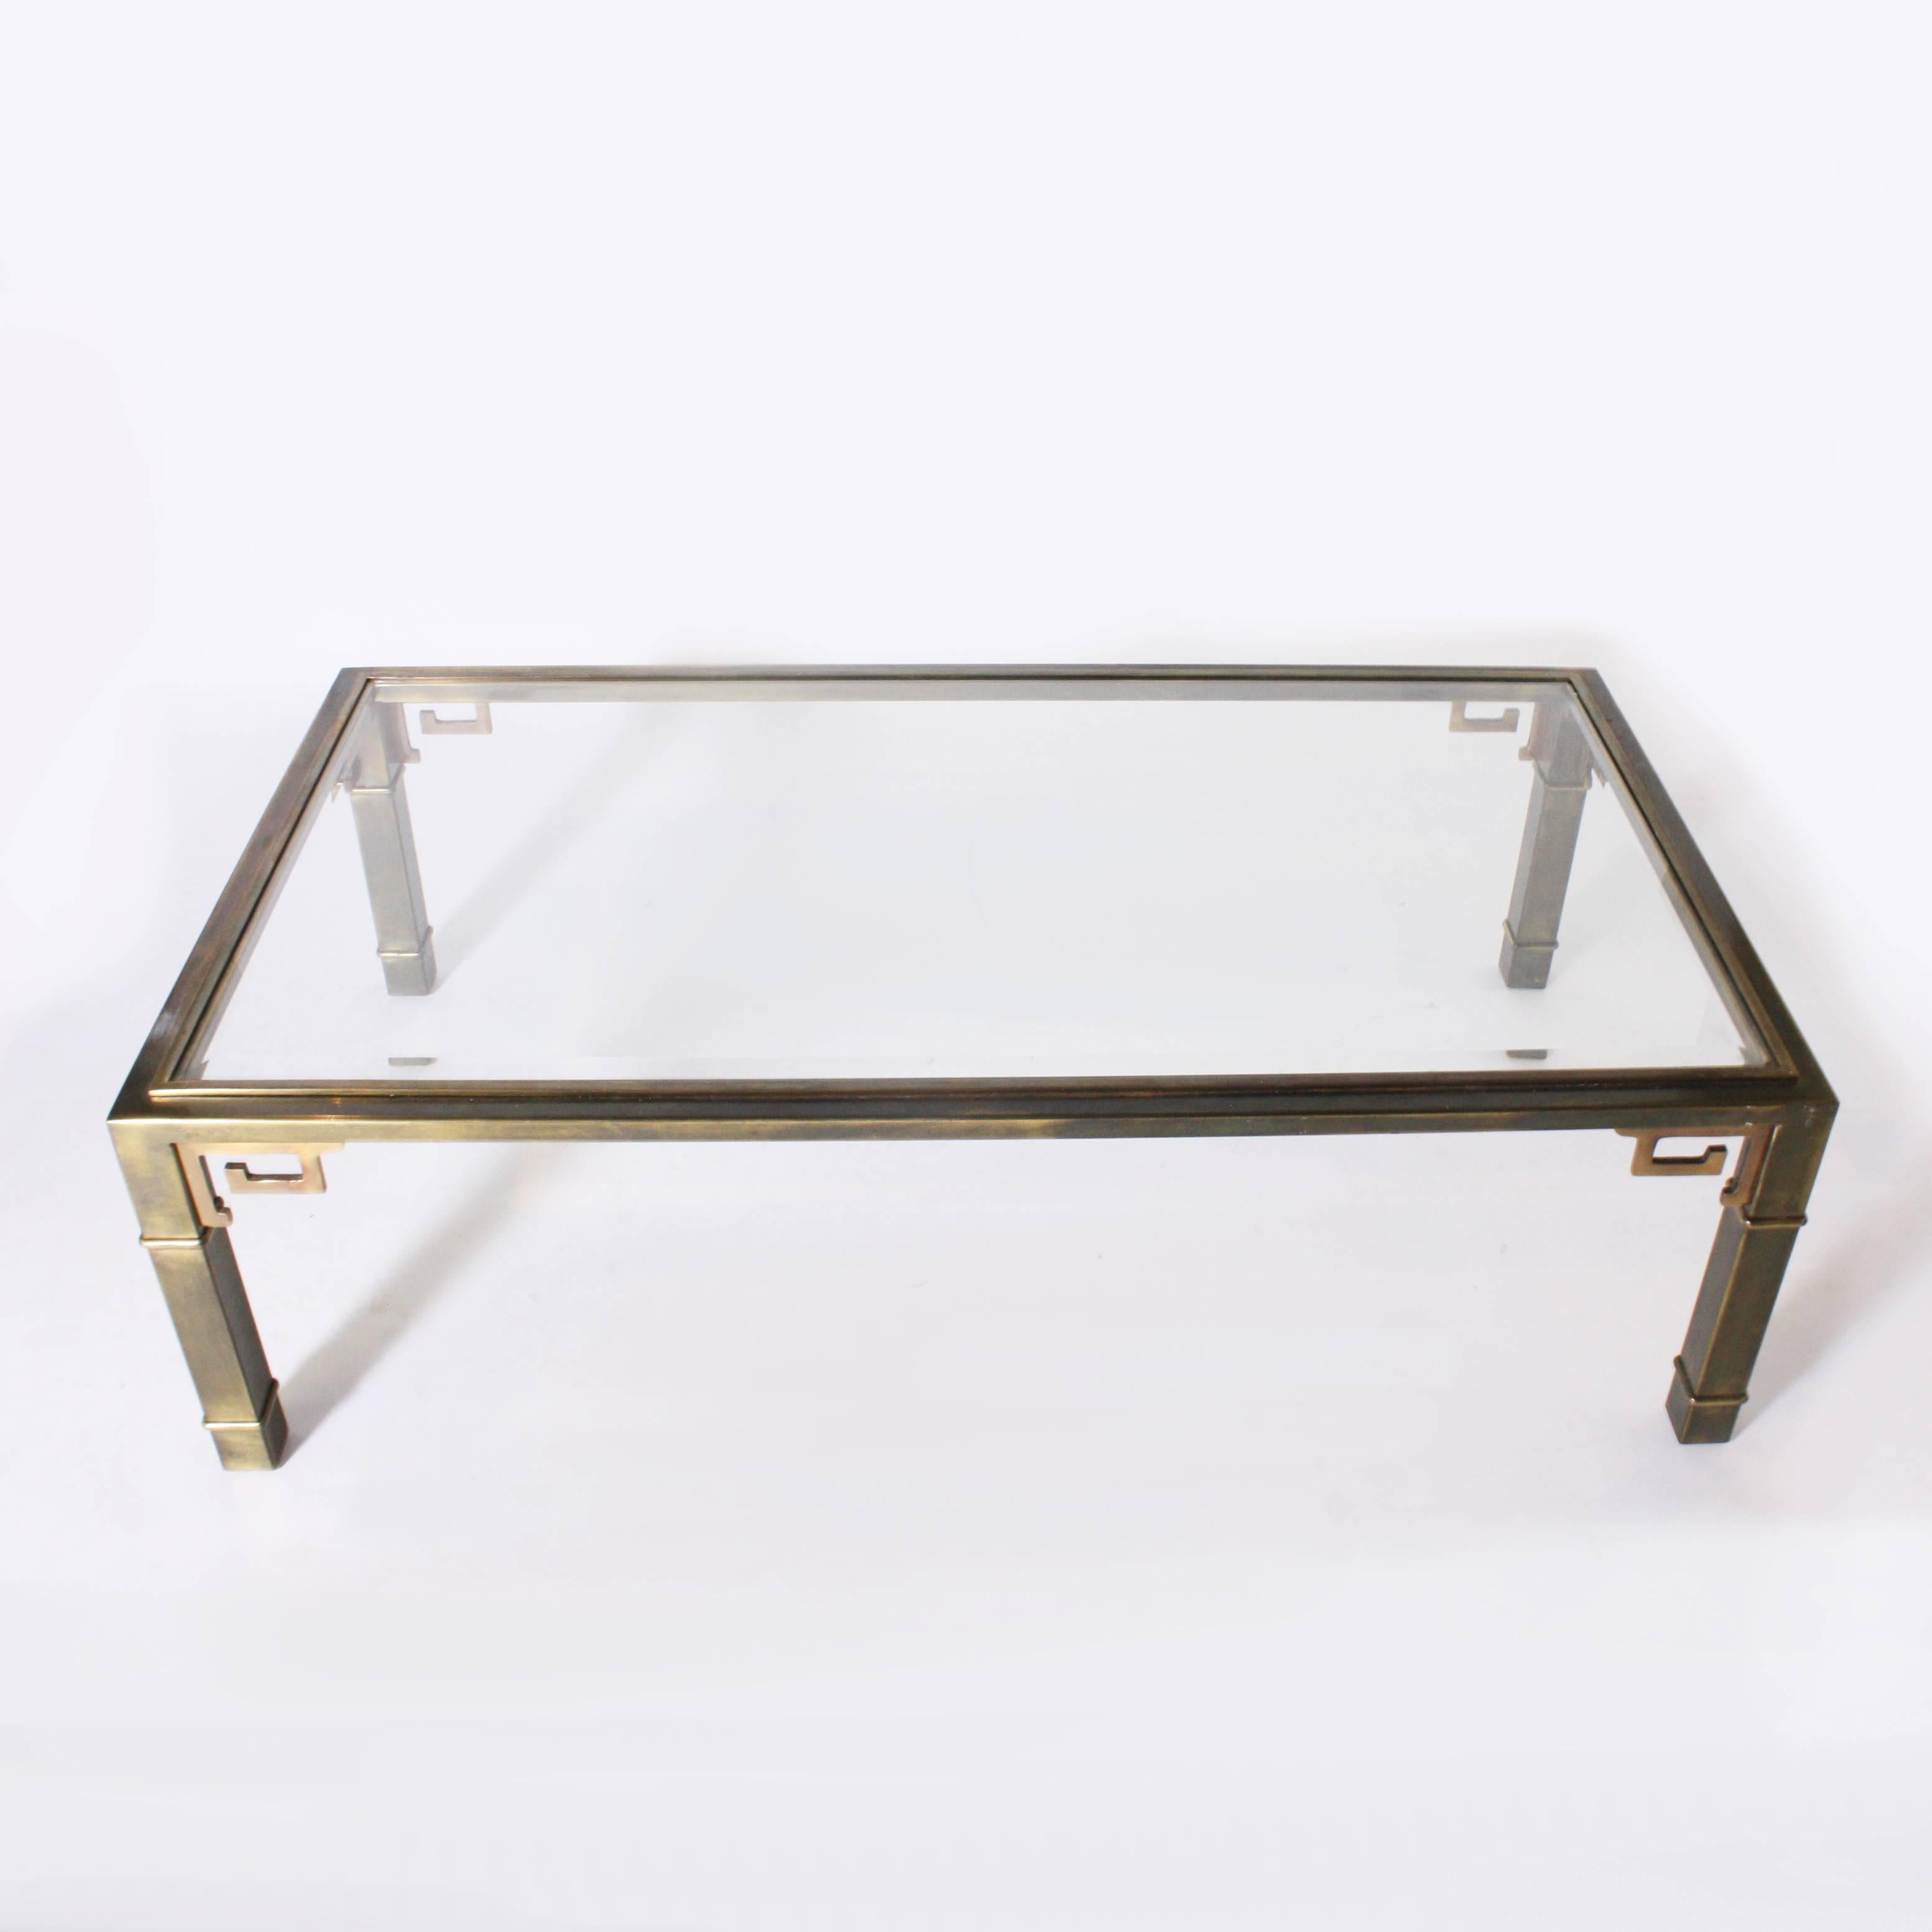 1970s rectangle Mastercraft coffee table with Greek key detail. This coffee table has a clear glass top.
 